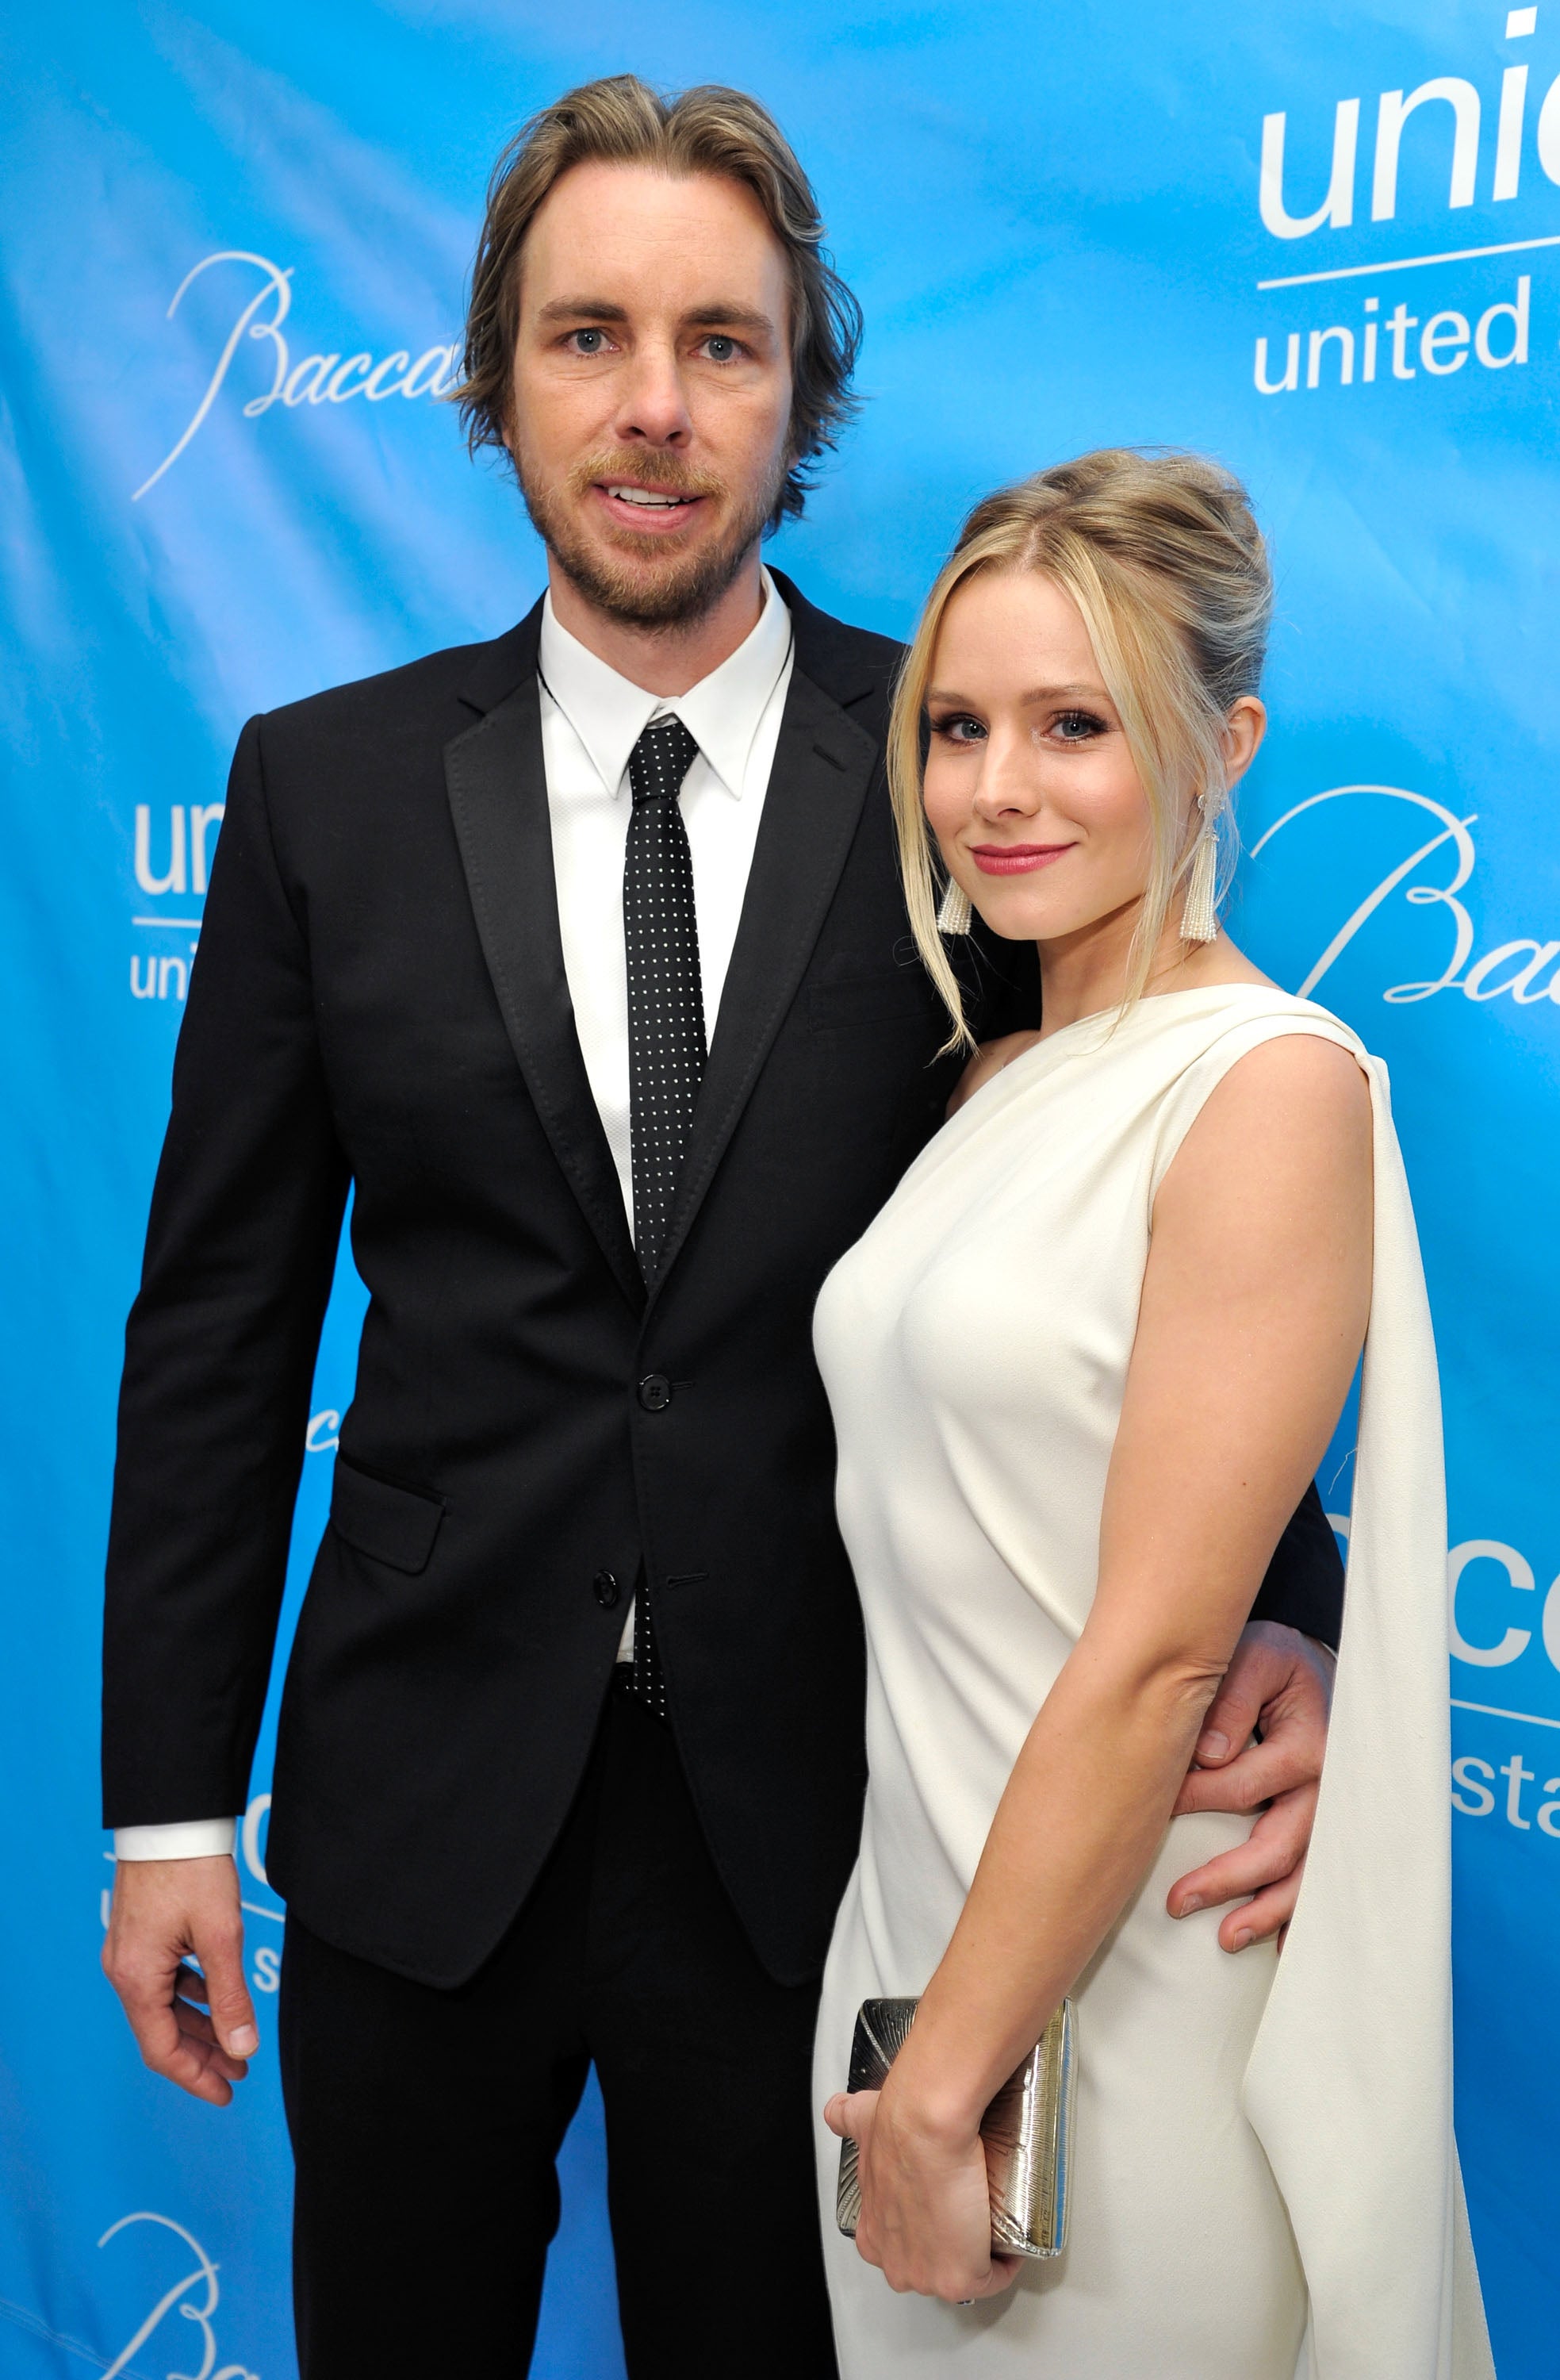 Dax Shepard Posts Nude Pic of Kristen Bell: 'Look at This Specimen' |  Entertainment Tonight